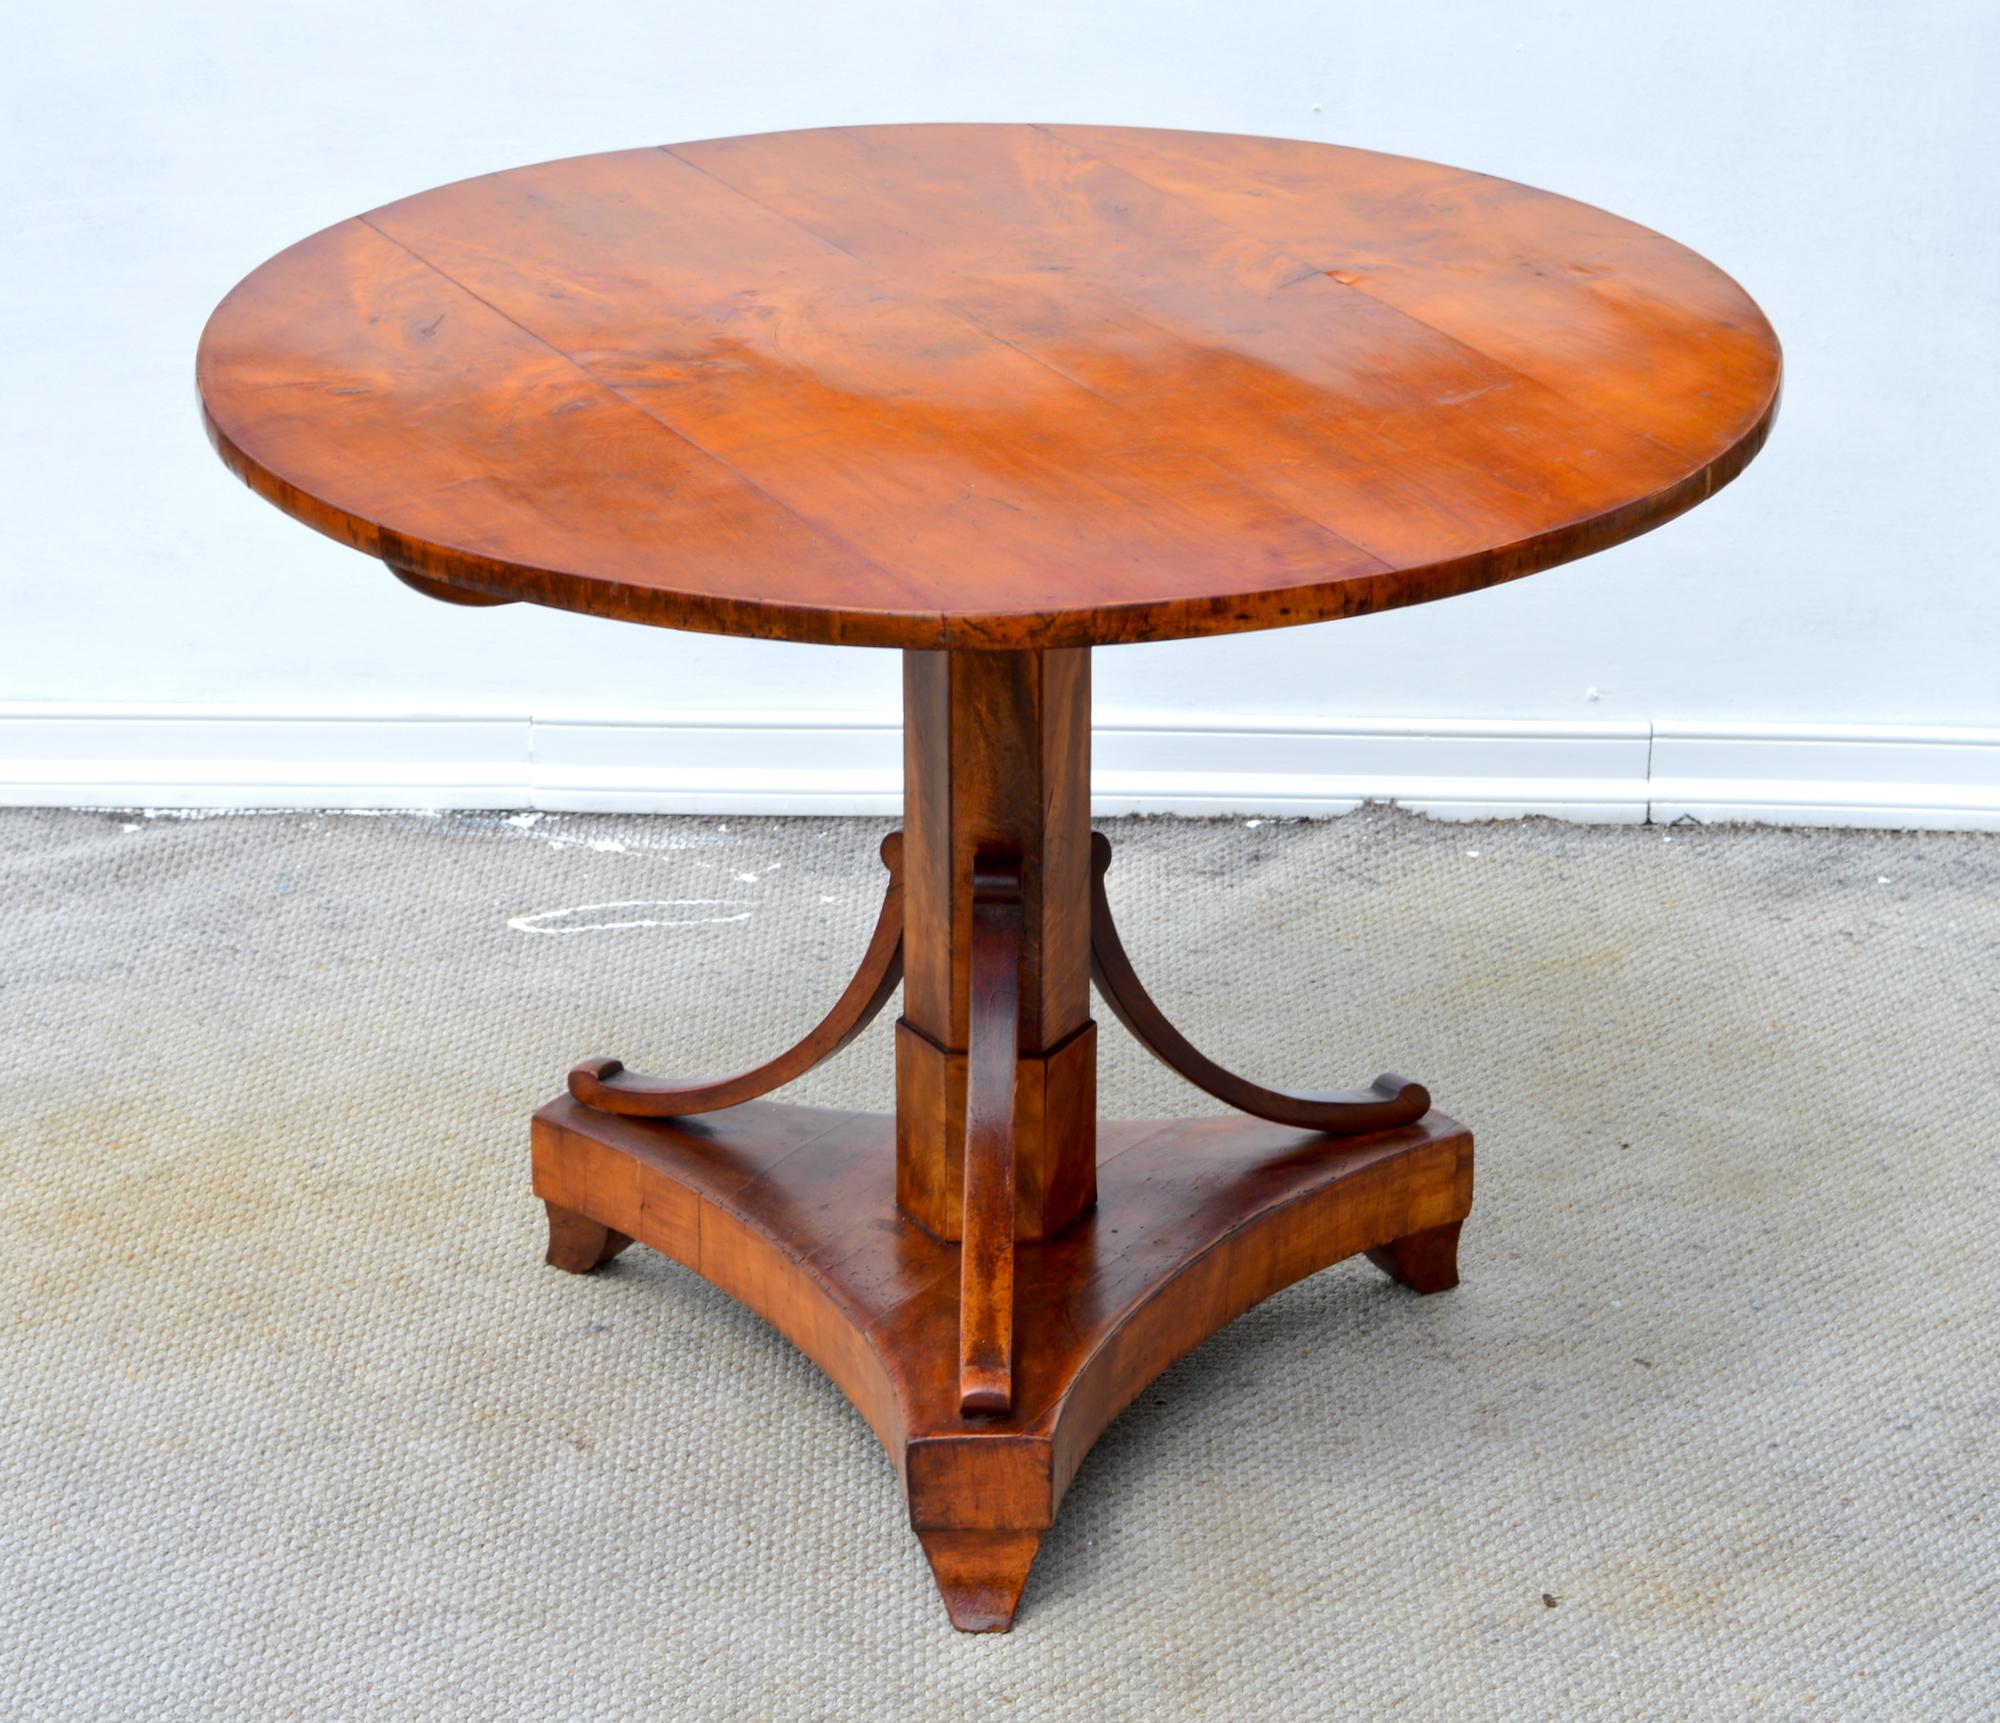 A glorious Biedermeier centre table of cherry, circa 1830. The tilting three board top is supported by a panelled hexagonal stem met with carved stemmed supports. All is floating on perfectly designed spade feet.
A wonderful statement piece for the